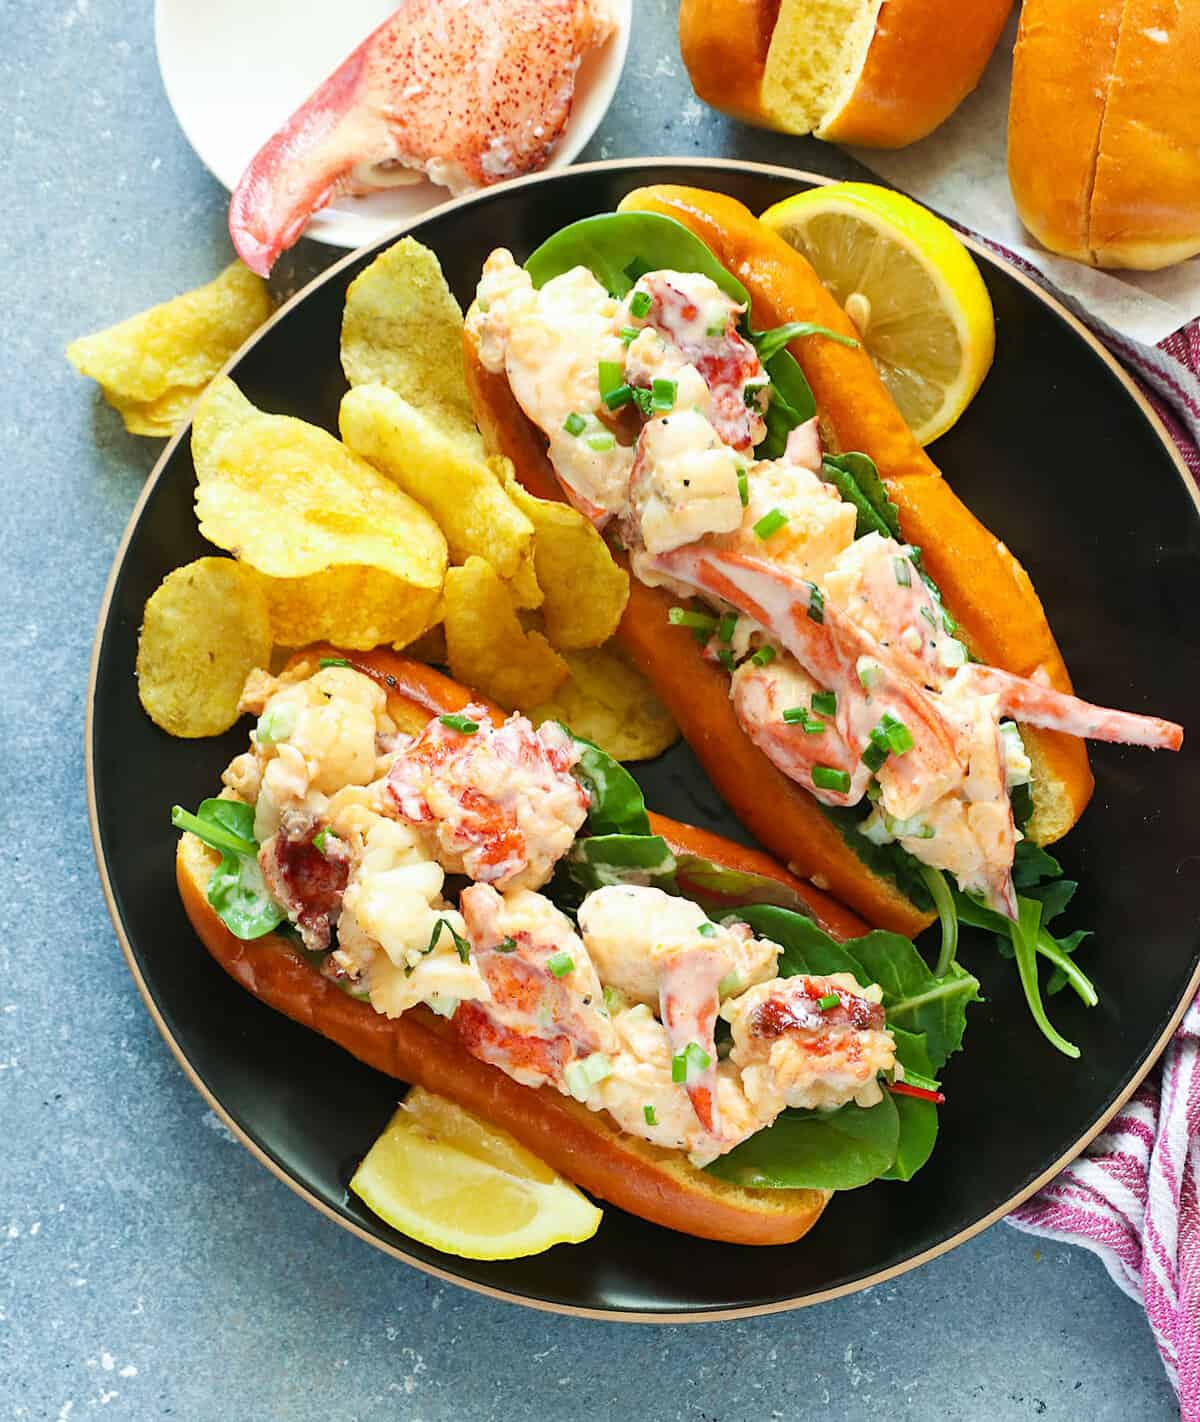 Insanely delicious lobster rolls with potato chips and lemon slices